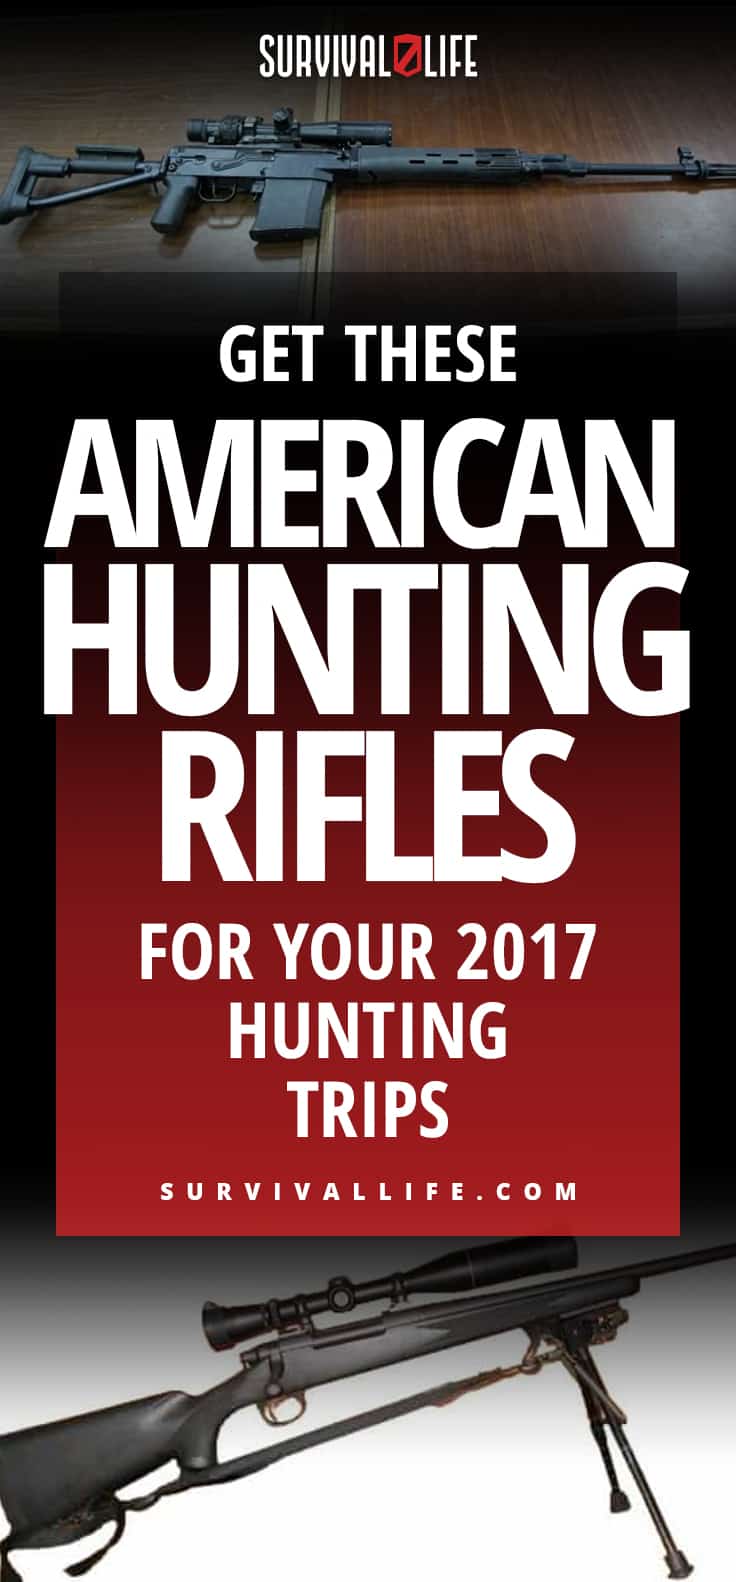 Get These American Hunting Rifles For Your 2017 Hunting Trips